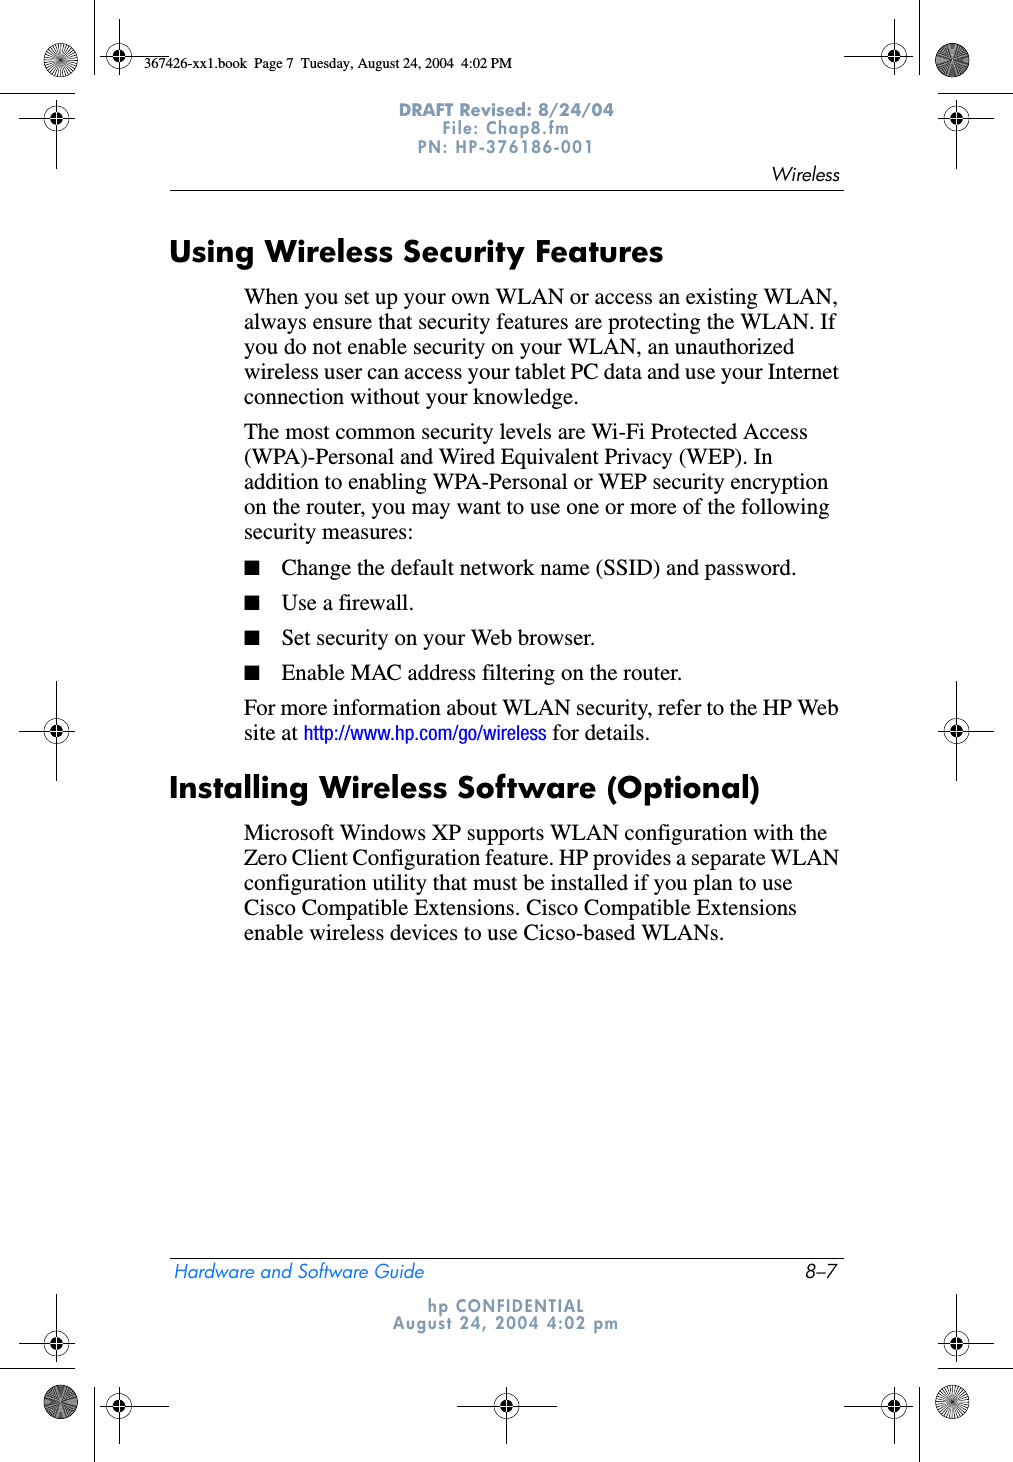 WirelessHardware and Software Guide 8–7DRAFT Revised: 8/24/04File: Chap8.fm PN: HP-376186-001 hp CONFIDENTIALAugust 24, 2004 4:02 pmUsing Wireless Security FeaturesWhen you set up your own WLAN or access an existing WLAN, always ensure that security features are protecting the WLAN. If you do not enable security on your WLAN, an unauthorized wireless user can access your tablet PC data and use your Internet connection without your knowledge.The most common security levels are Wi-Fi Protected Access (WPA)-Personal and Wired Equivalent Privacy (WEP). In addition to enabling WPA-Personal or WEP security encryption on the router, you may want to use one or more of the following security measures:■Change the default network name (SSID) and password.■Use a firewall.■Set security on your Web browser.■Enable MAC address filtering on the router.For more information about WLAN security, refer to the HP Web site at http://www.hp.com/go/wireless for details.Installing Wireless Software (Optional)Microsoft Windows XP supports WLAN configuration with the Zero Client Configuration feature. HP provides a separate WLAN configuration utility that must be installed if you plan to use Cisco Compatible Extensions. Cisco Compatible Extensions enable wireless devices to use Cicso-based WLANs.367426-xx1.book  Page 7  Tuesday, August 24, 2004  4:02 PM